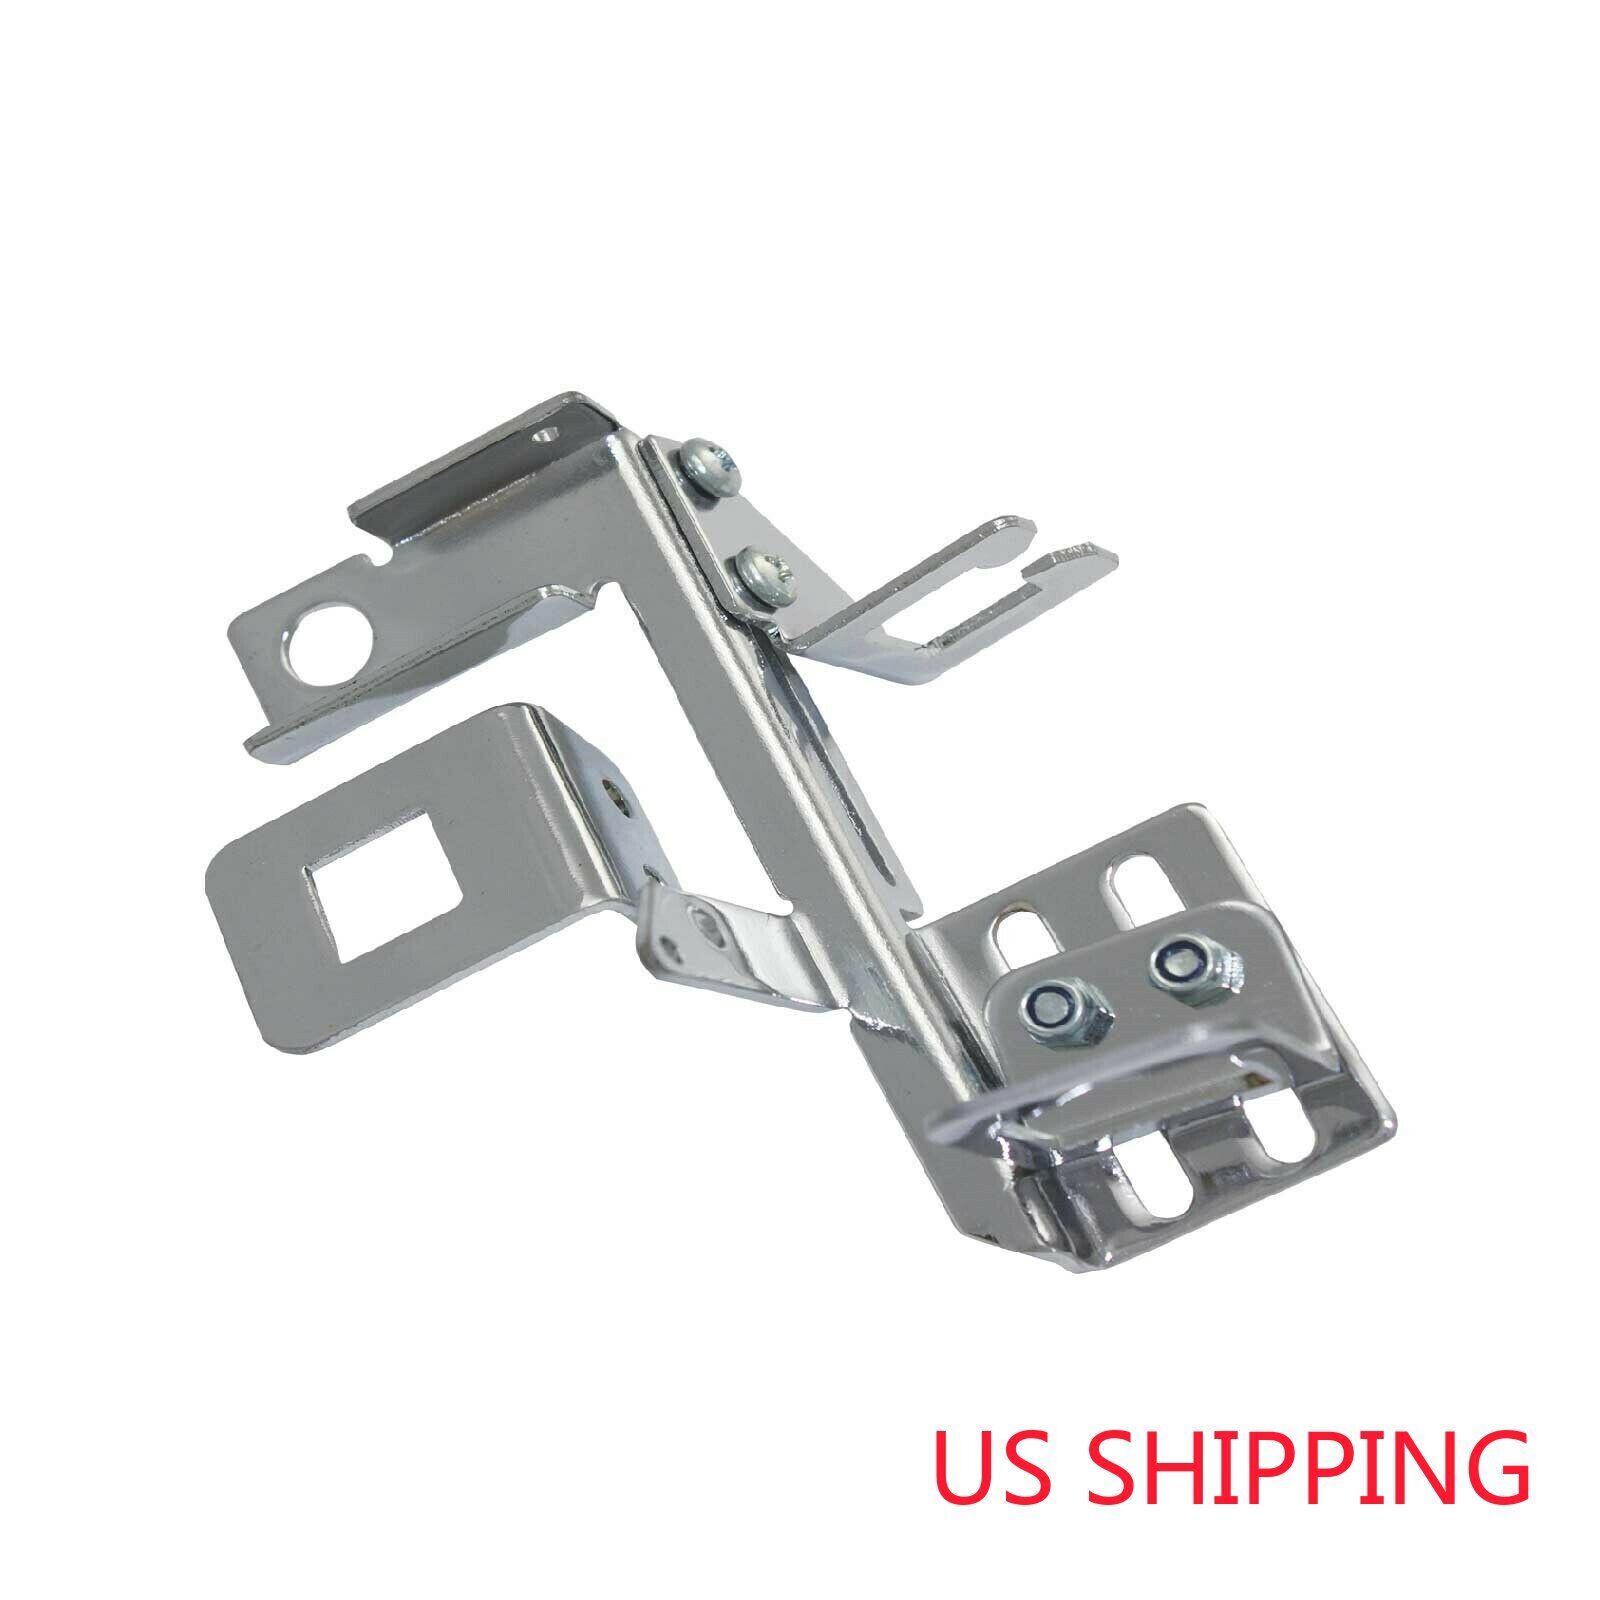 GM Chrome Throttle Cable Kickdown Bracket Kick Down For Chevy SBC BBC Holley